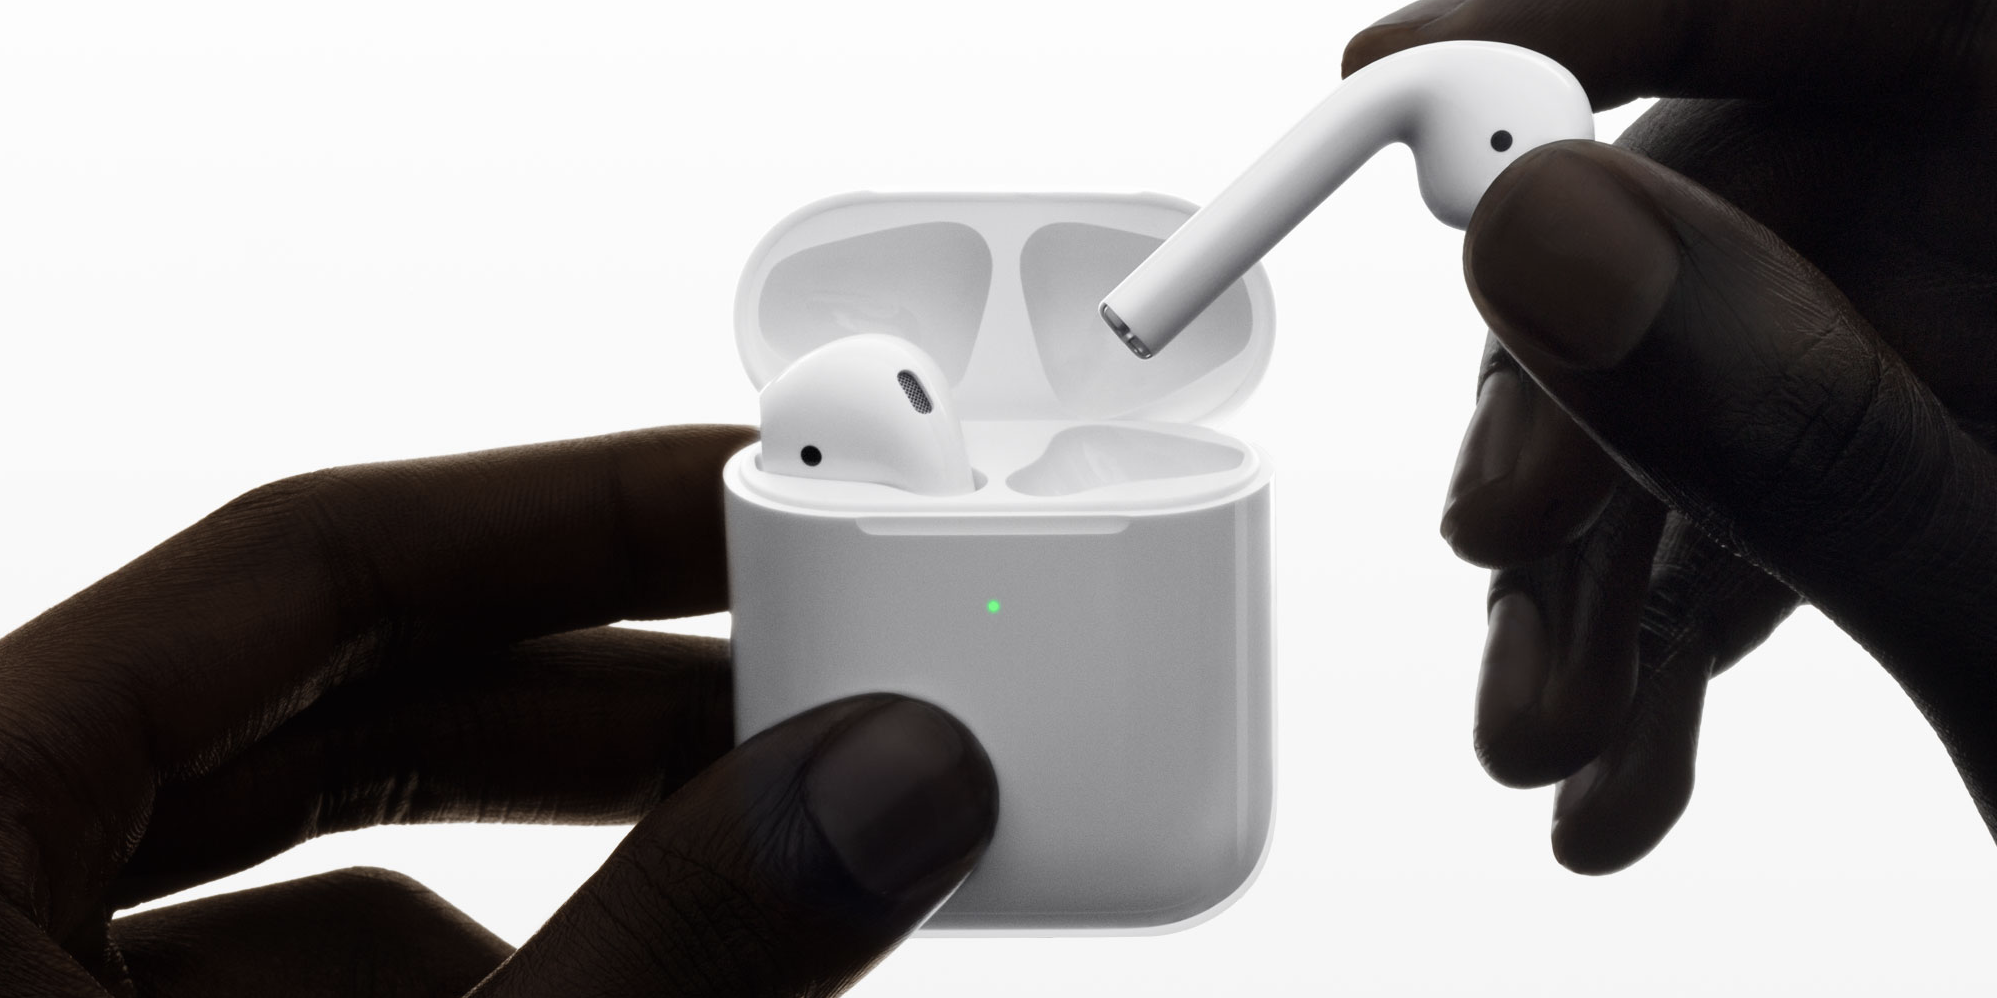 Second-generation AirPods and charging case